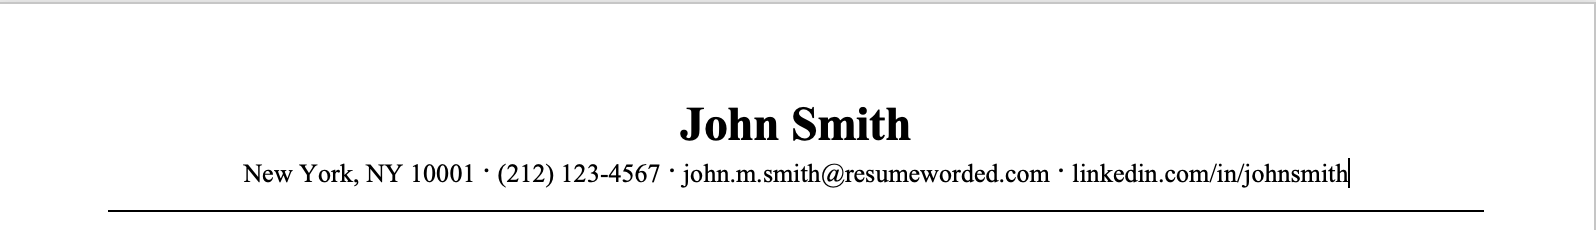 Example of how to link to social media in your resume header